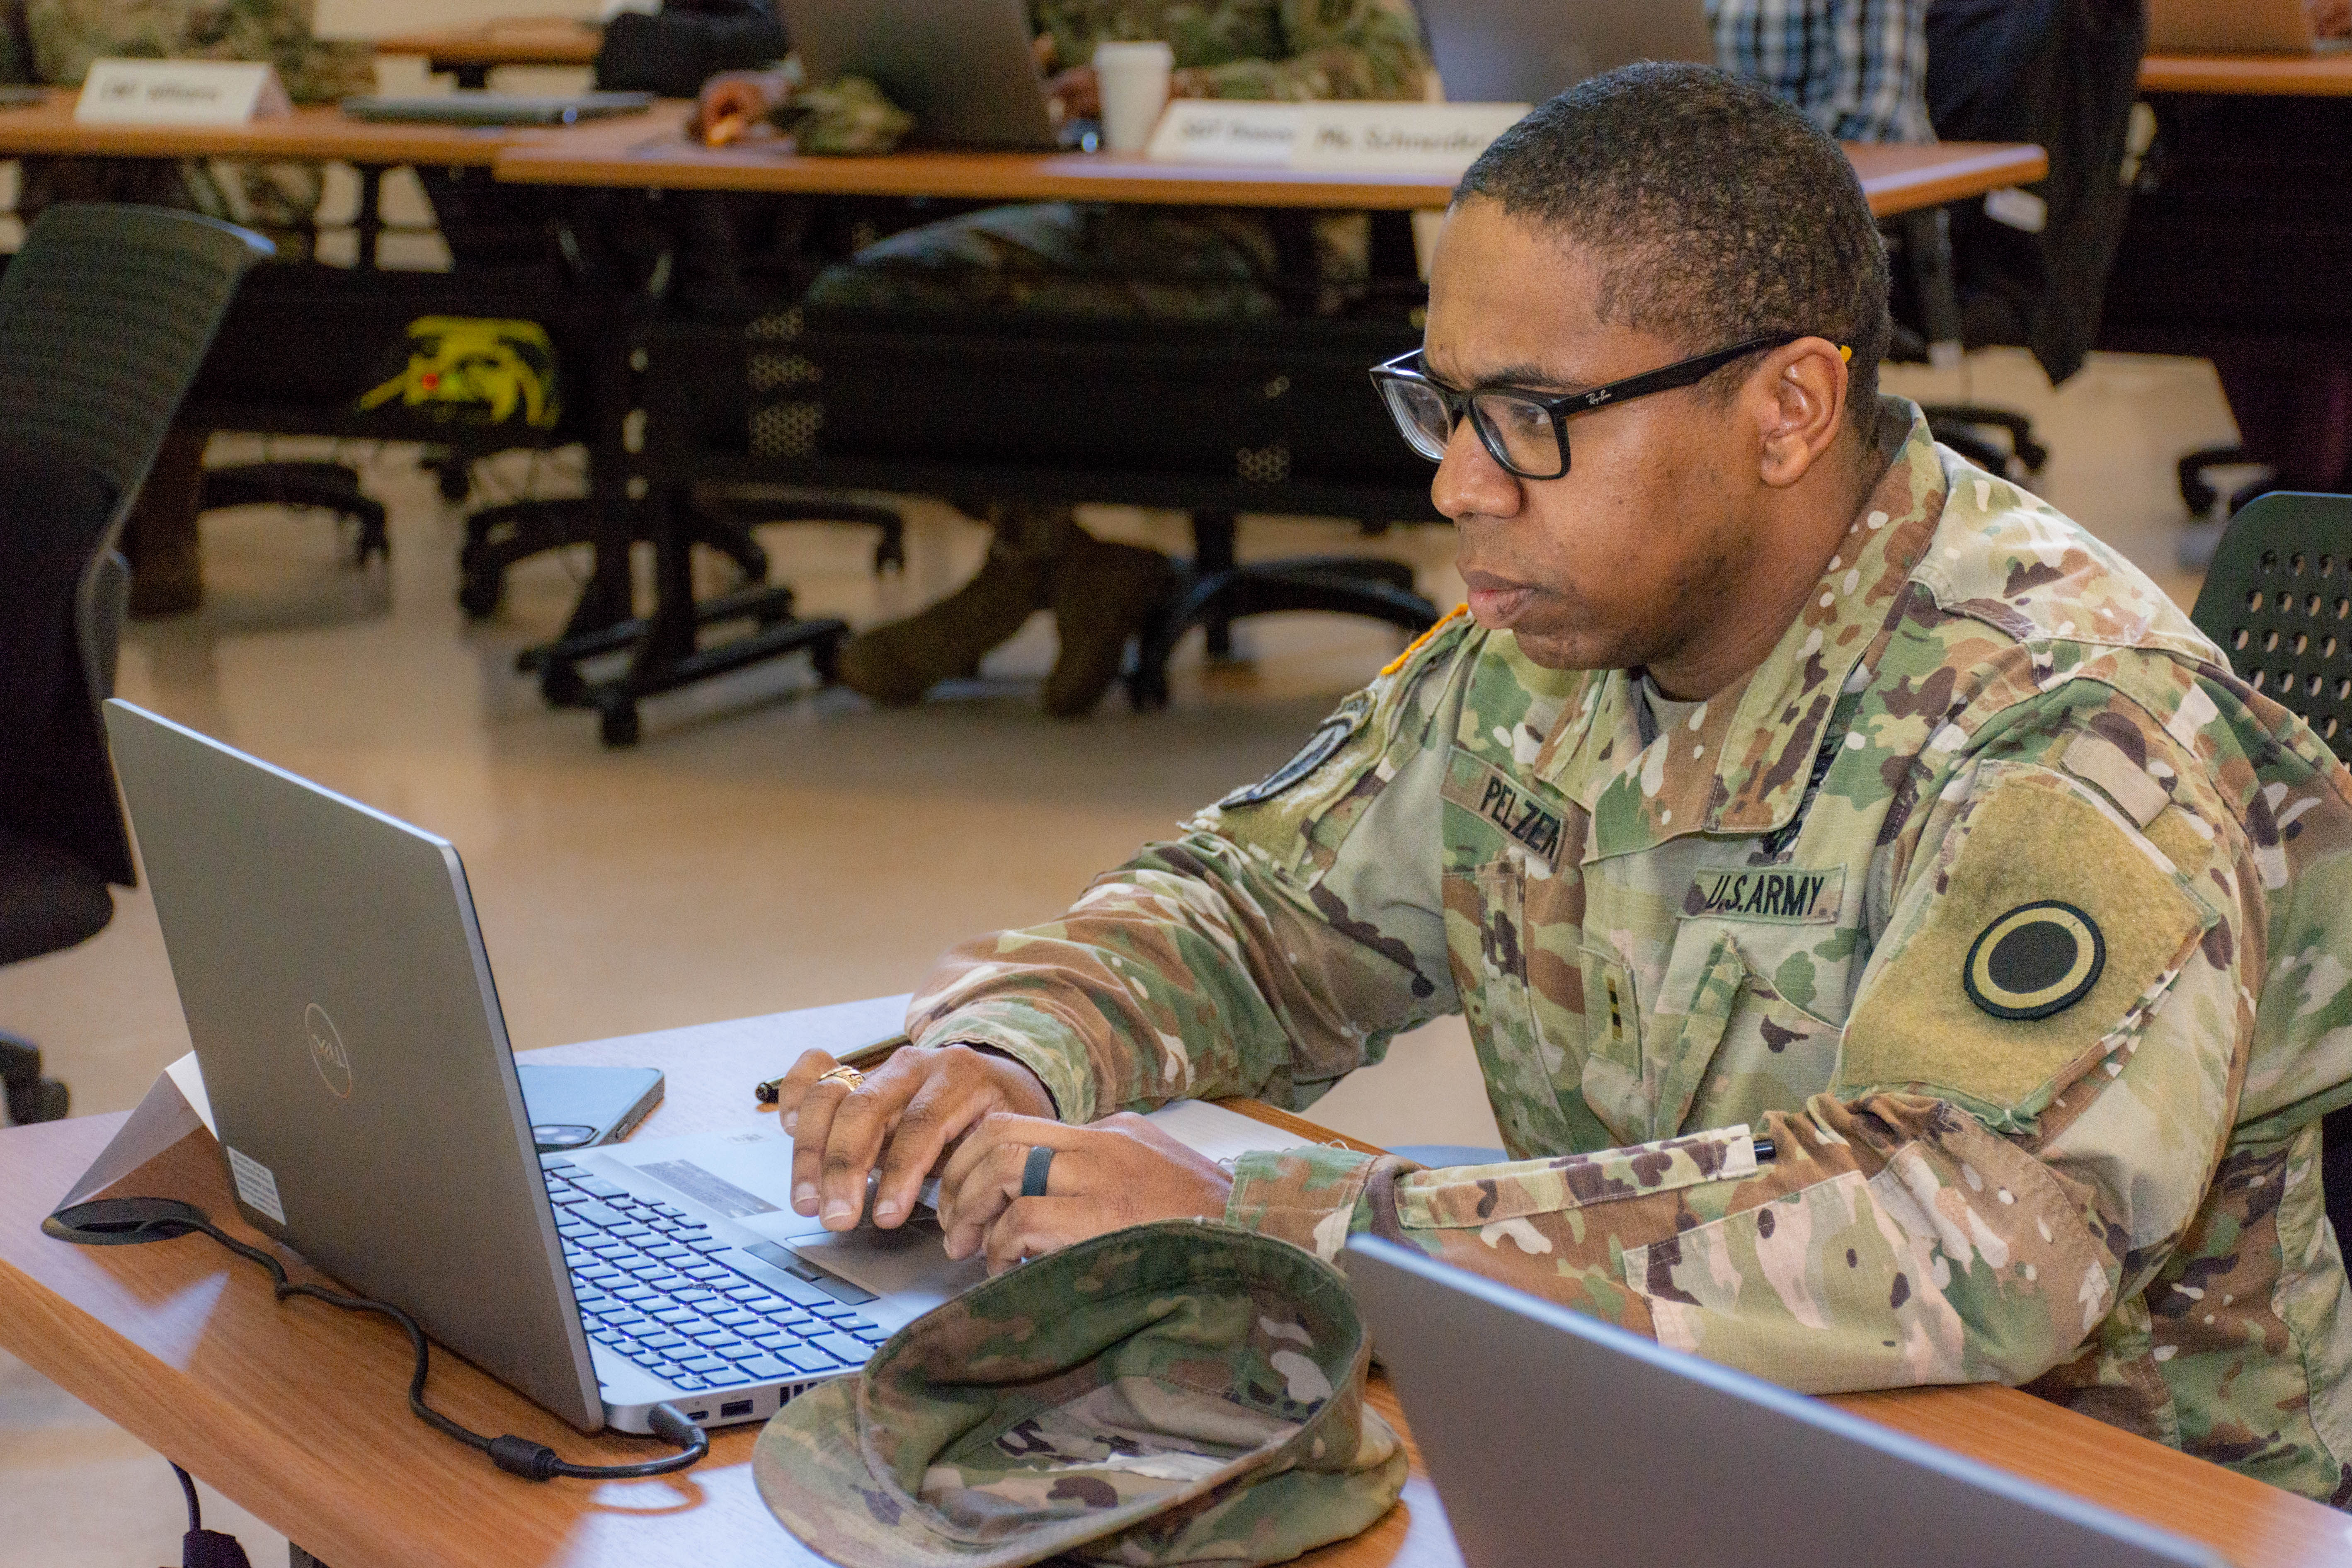 Soldier completing training on laptop